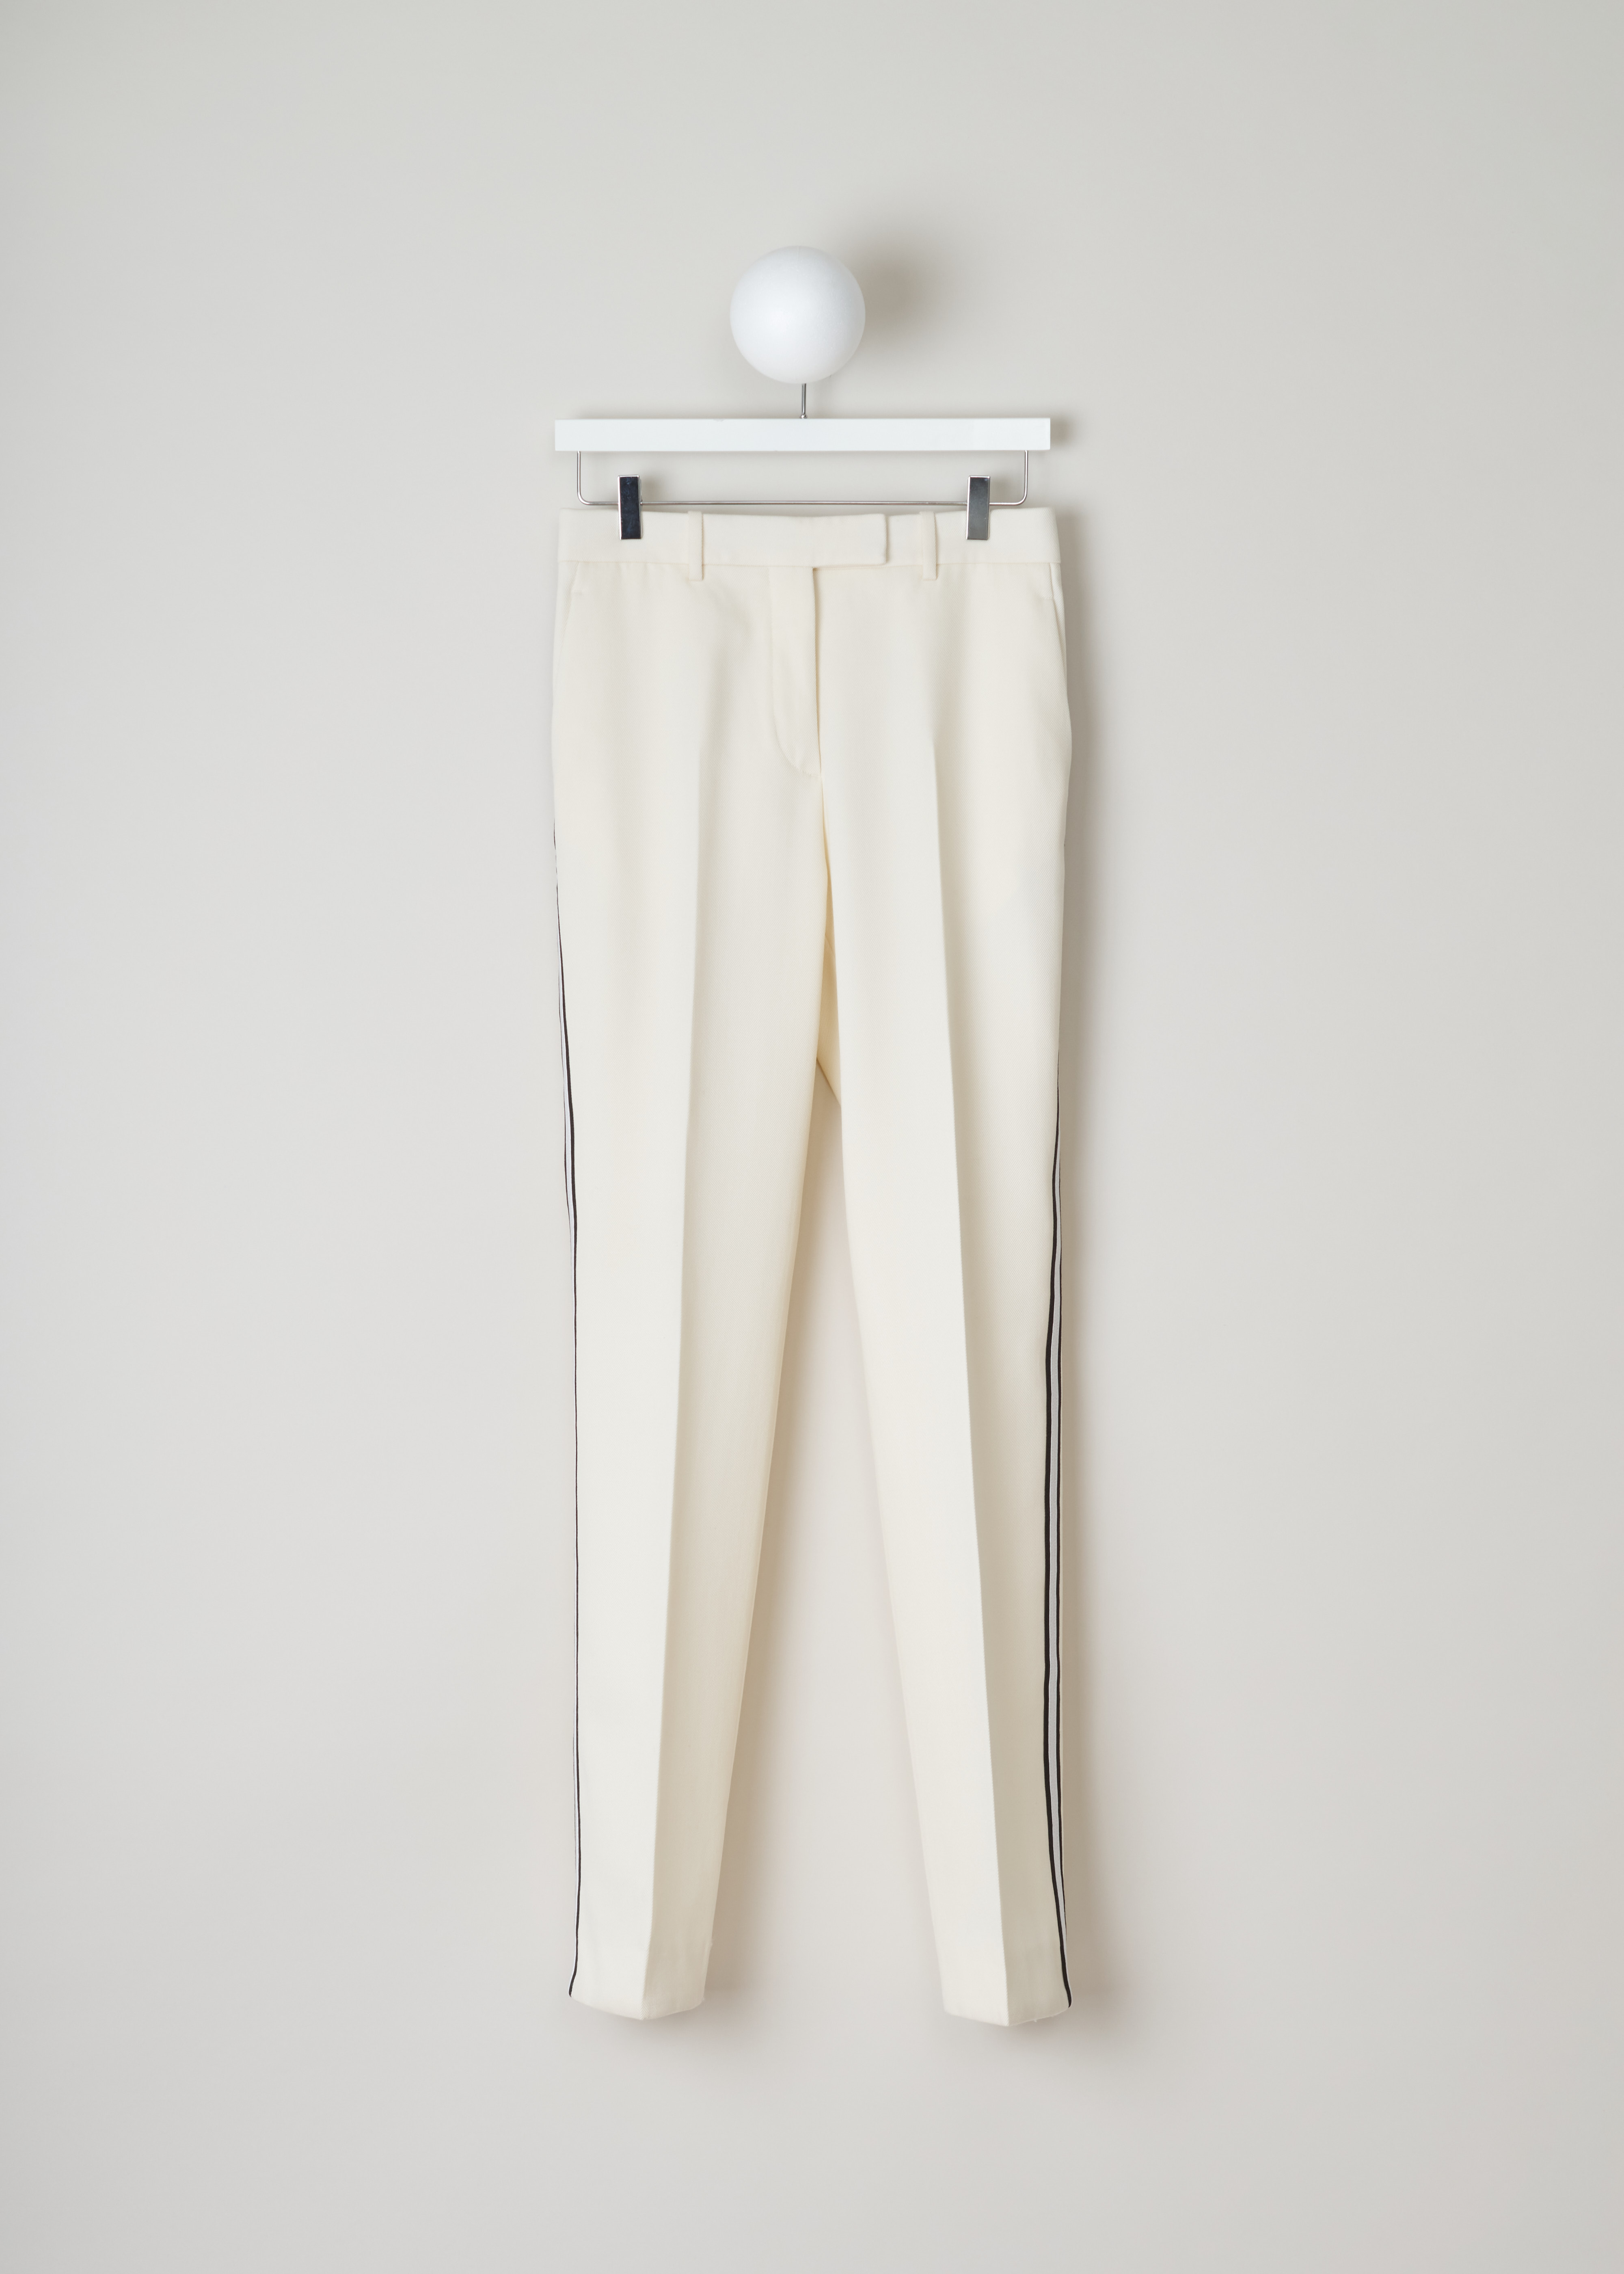 Calvin Klein 205W39NYC White pants with ribbon trim 84WWPB22_W037_197 off-white front. Off-white wool pants with a white and black side ribbon trim.
These straight pants have two slant pockets on the front and a welt pocket on the back.